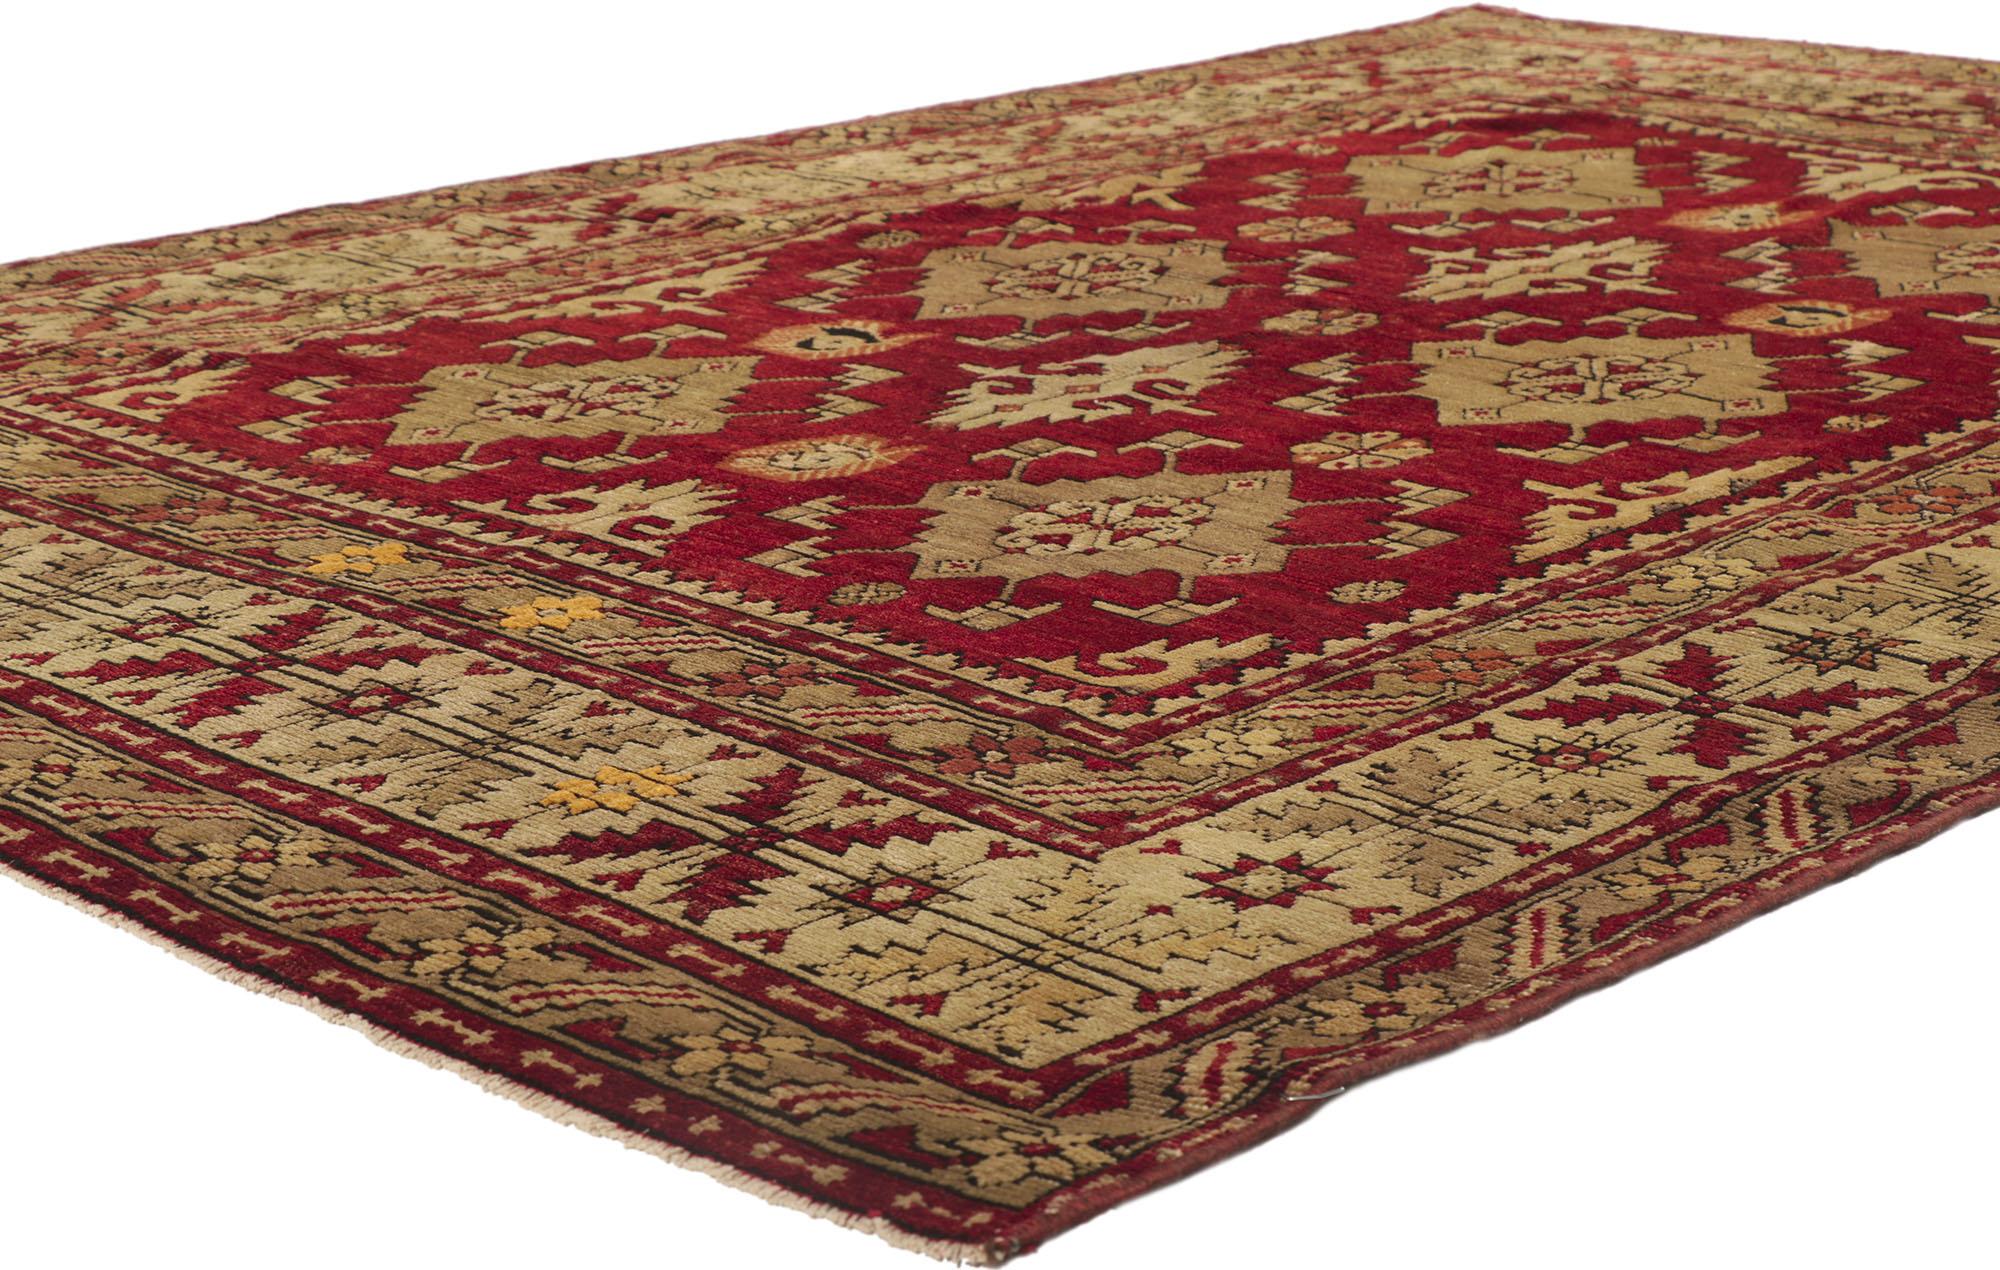 53695 Vintage Turkish Oushak rug 5'06 x 8'00. This hand-knotted wool vintage Turkish Oushak rug features an all-over geometric pattern composed of ambiguous motifs. It is enclosed with a rectilinear leaf and star border flanked with an inner and